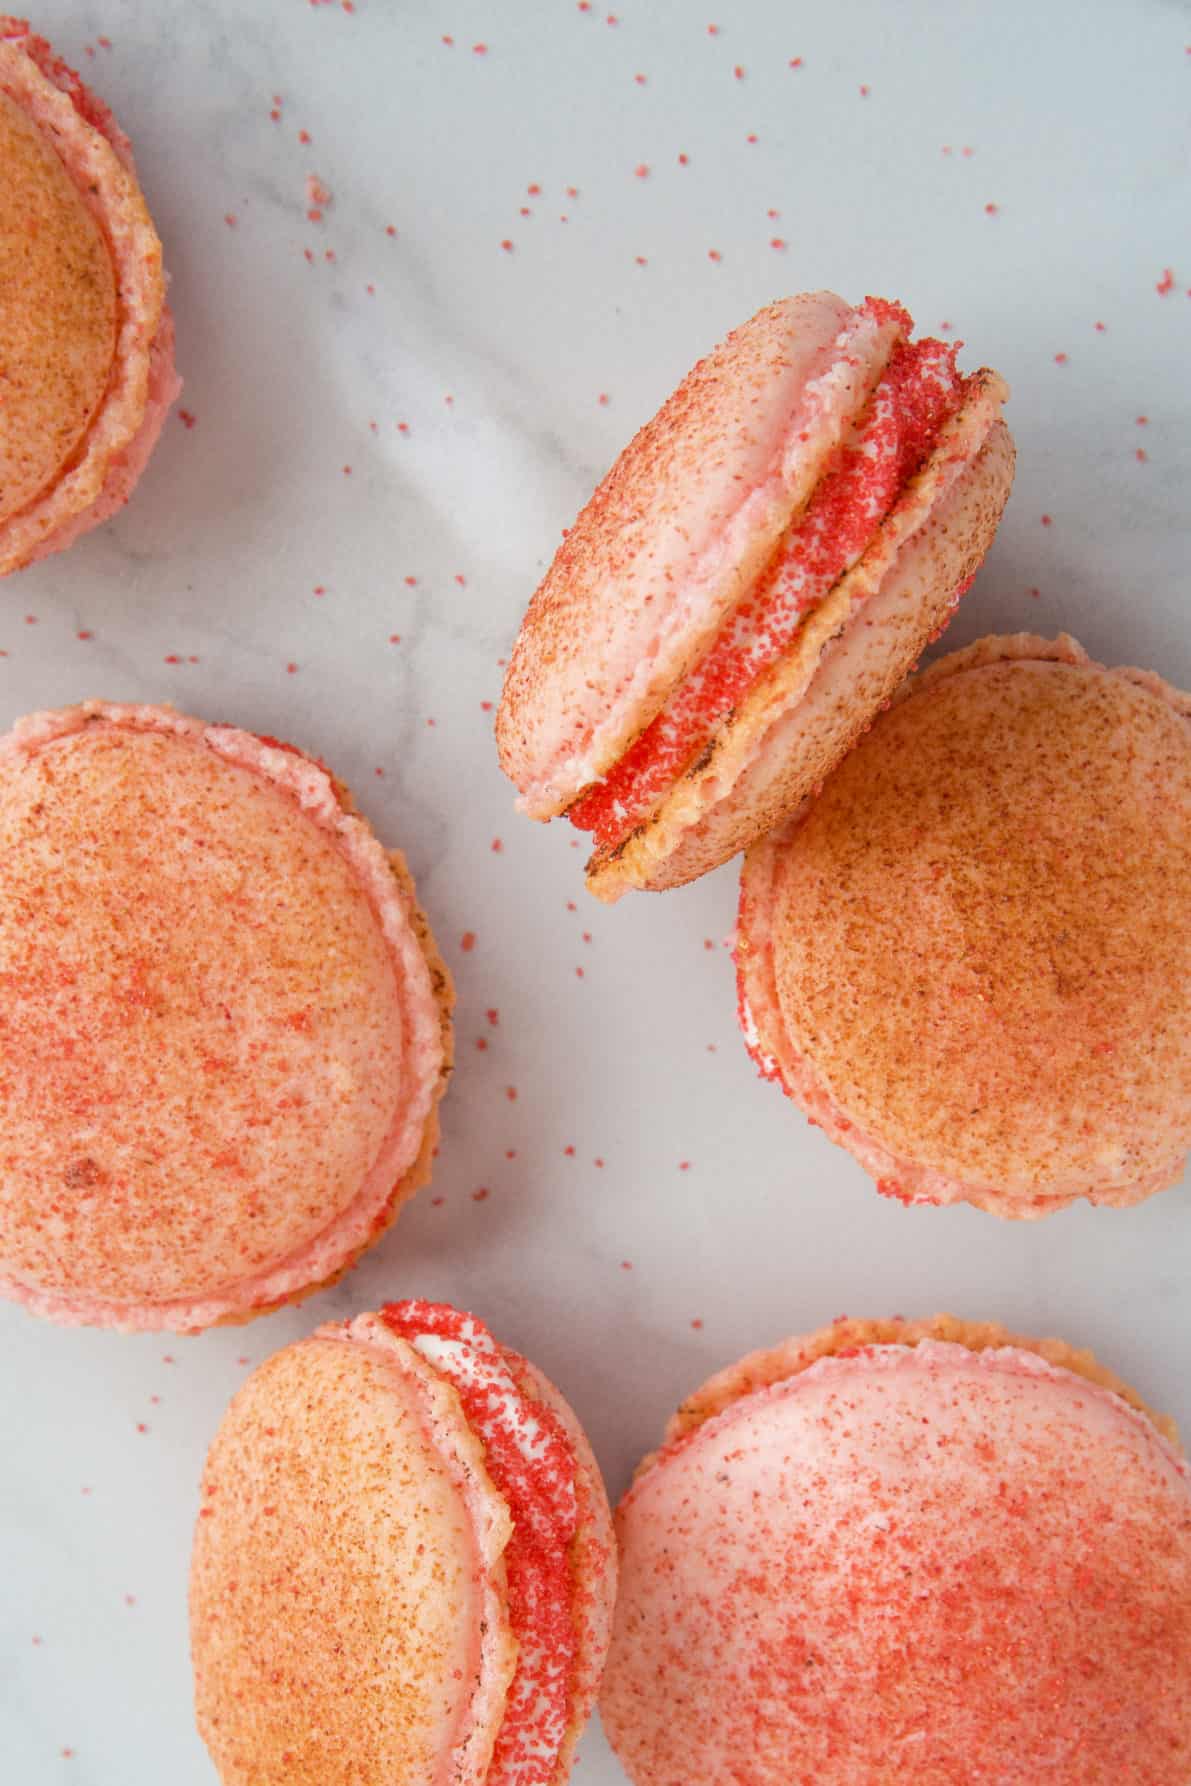 Strawberry cheesecake macarons on a marble surface.